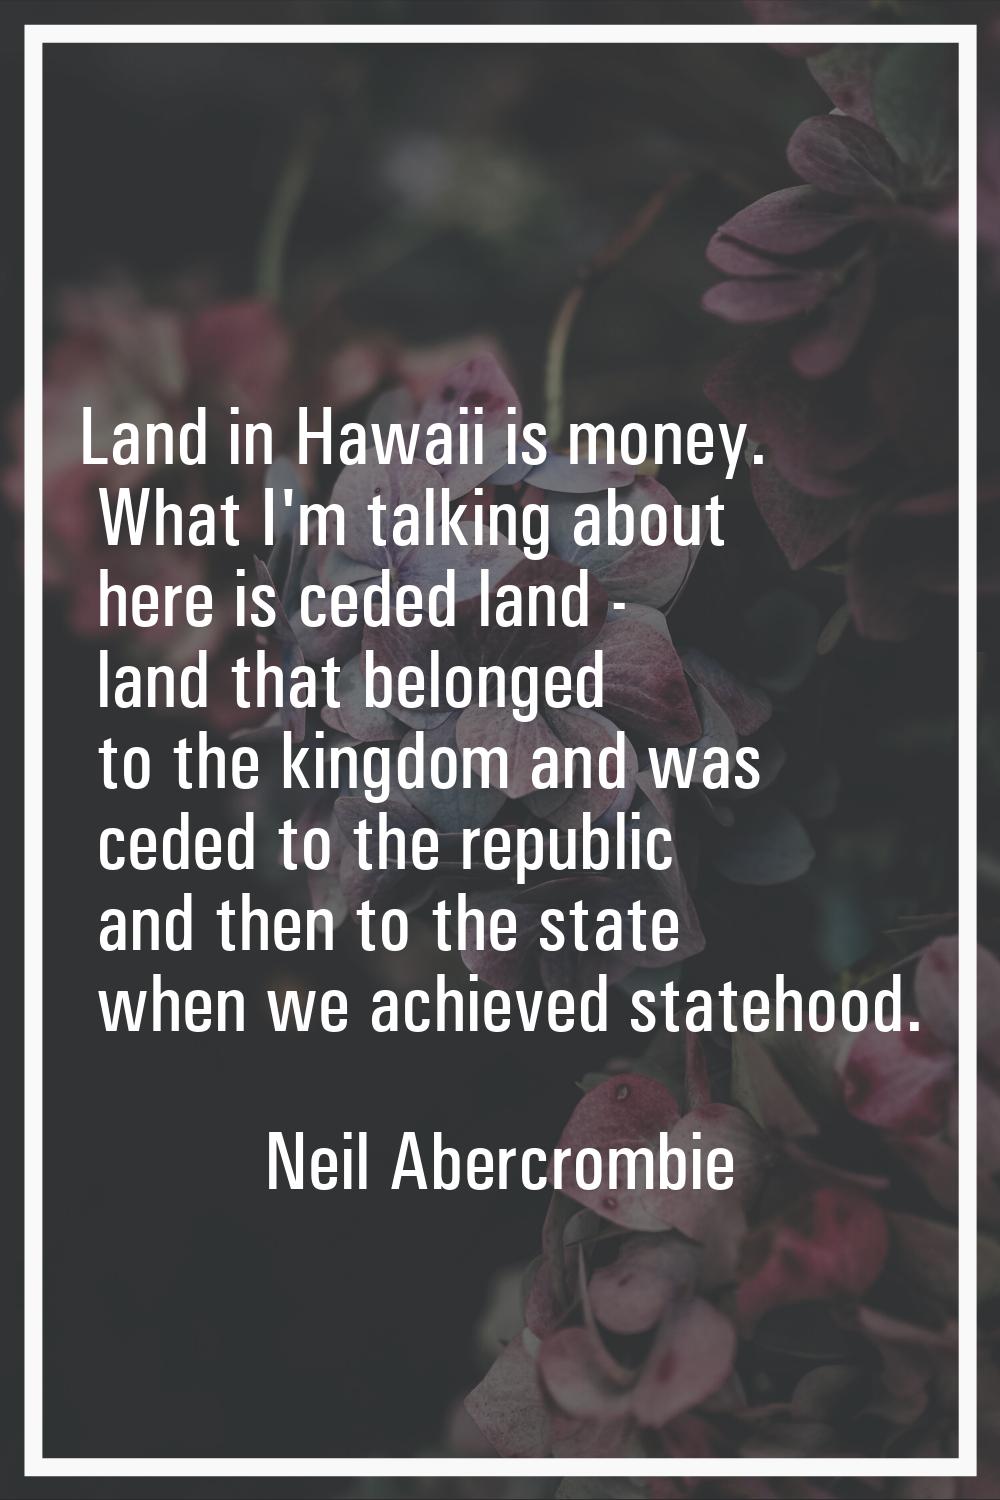 Land in Hawaii is money. What I'm talking about here is ceded land - land that belonged to the king